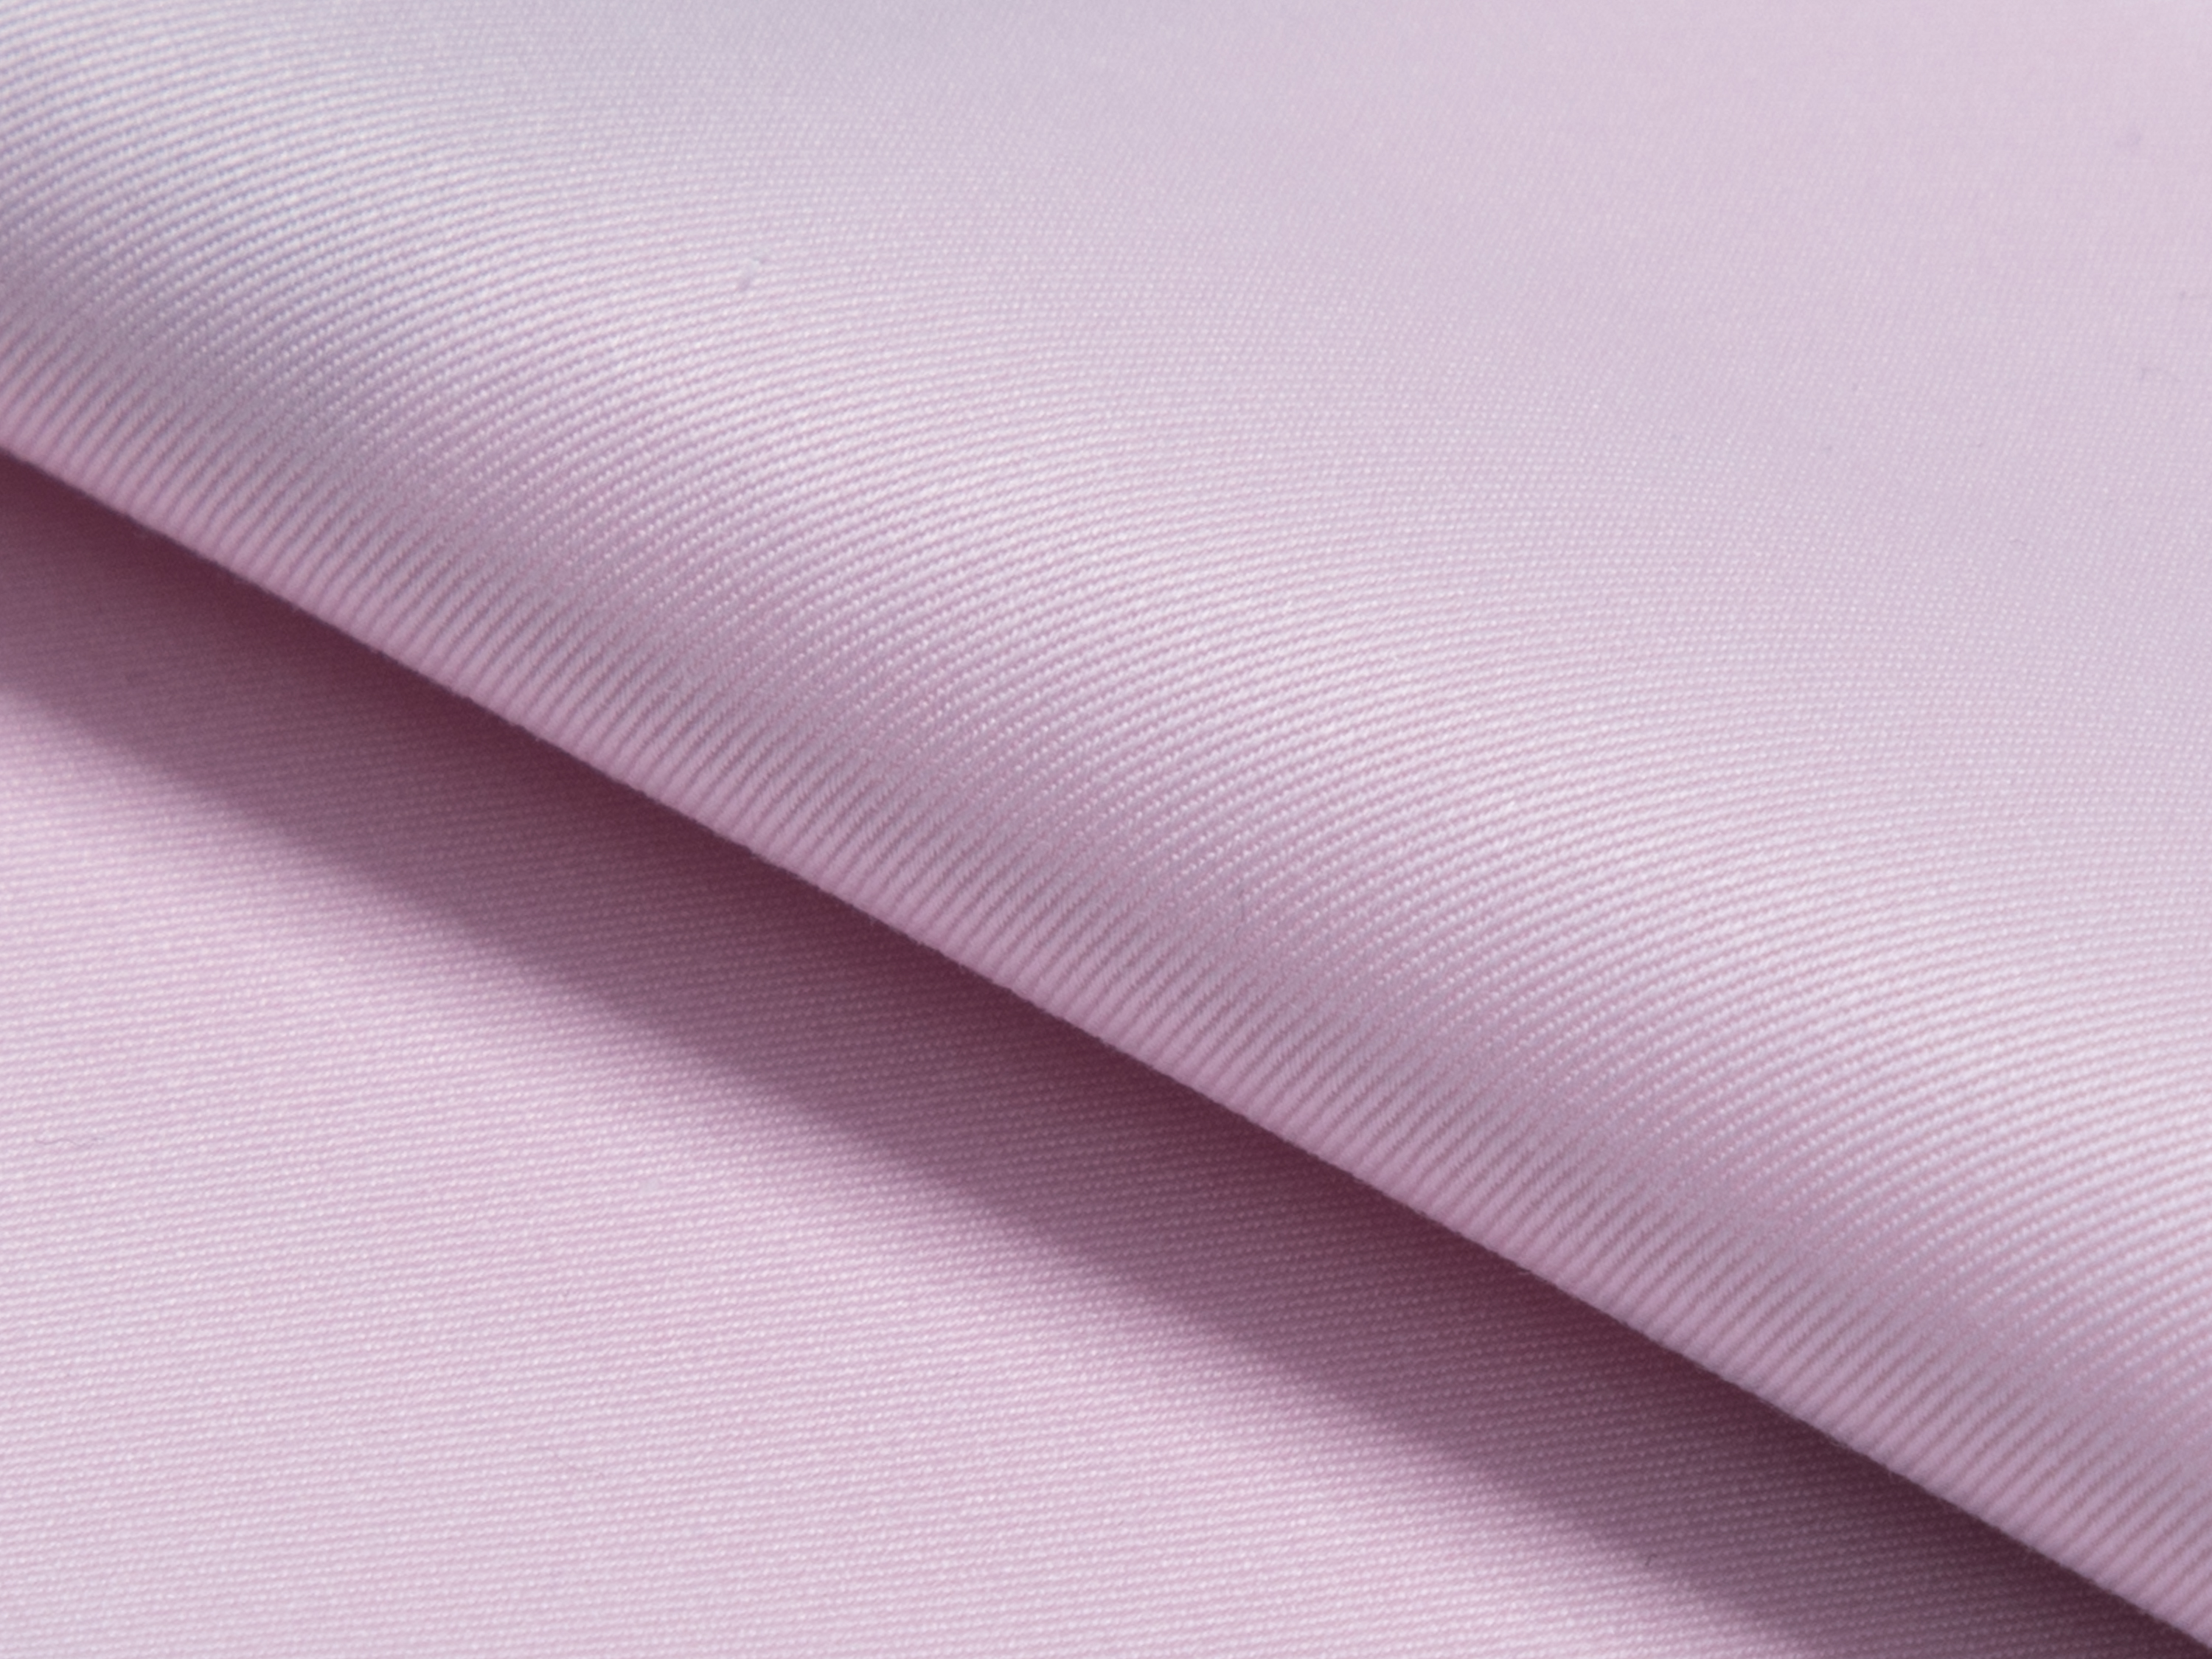 Buy tailor made shirts online -  - Twill Pink